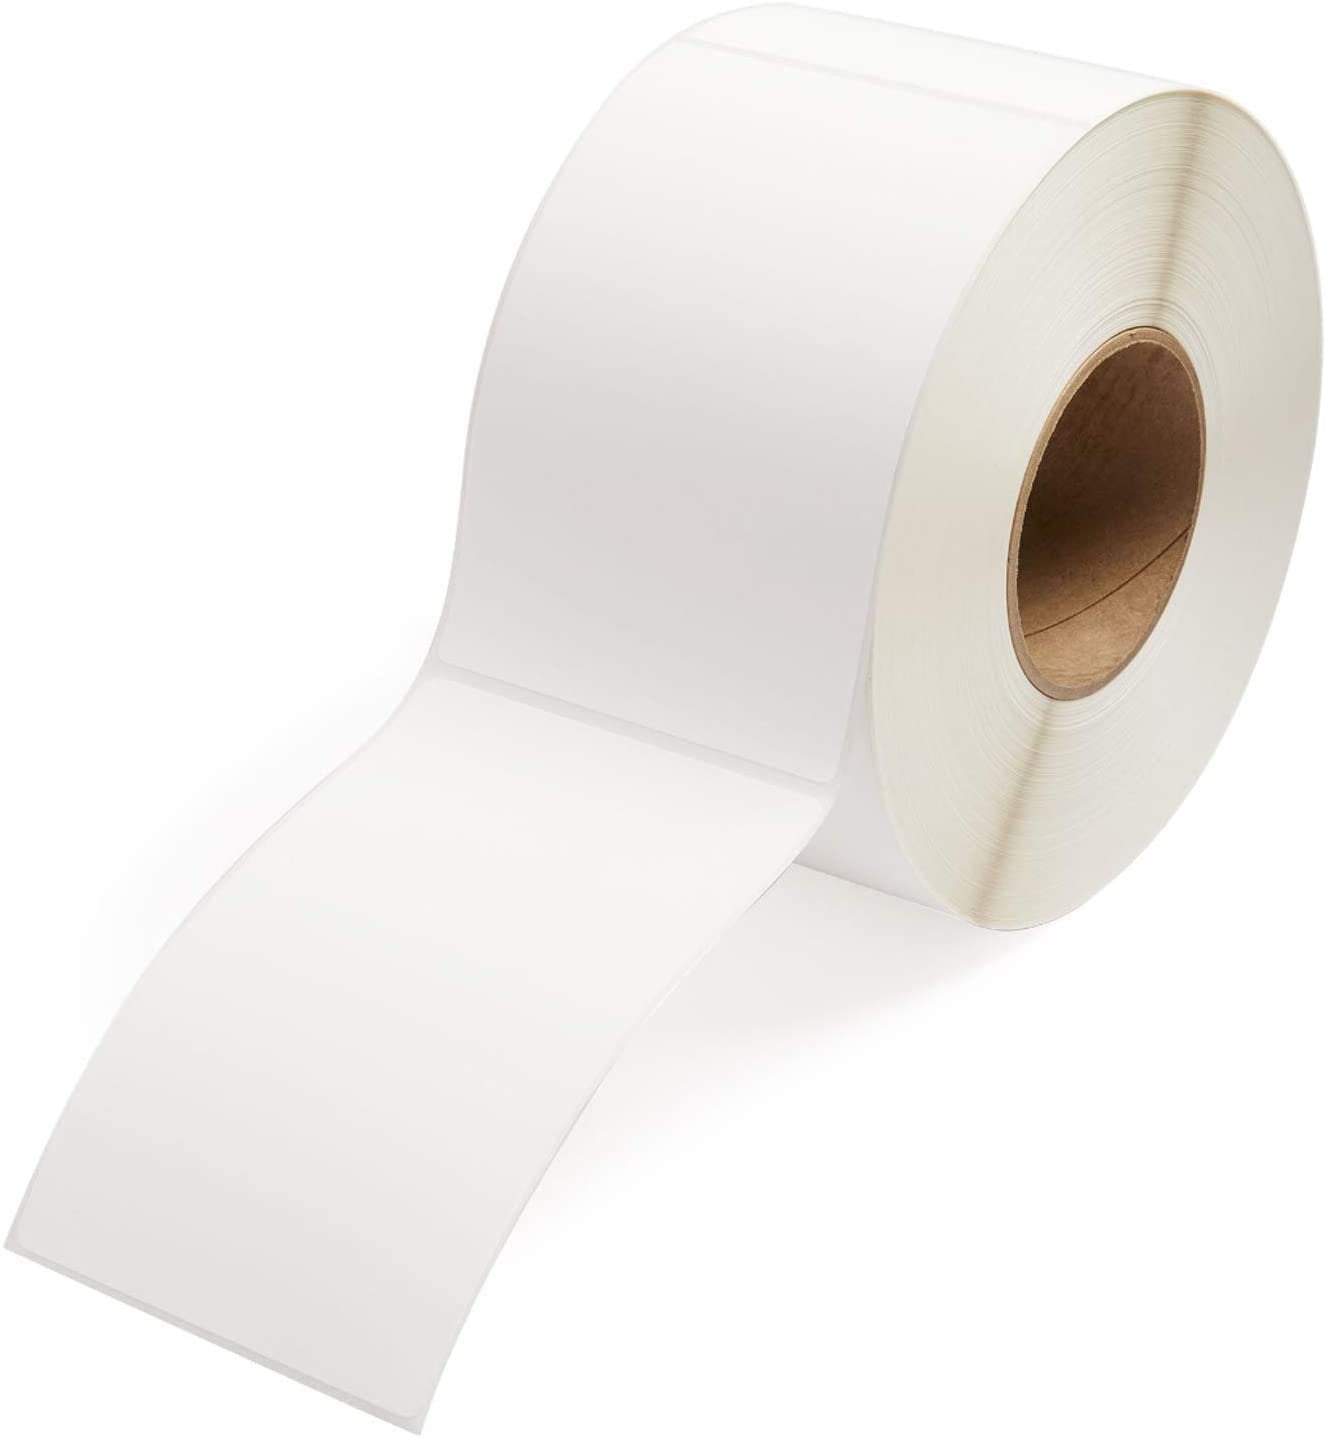 4x2 Thermal Shipping Paper Roll of 1000 Labels Self-adhesive